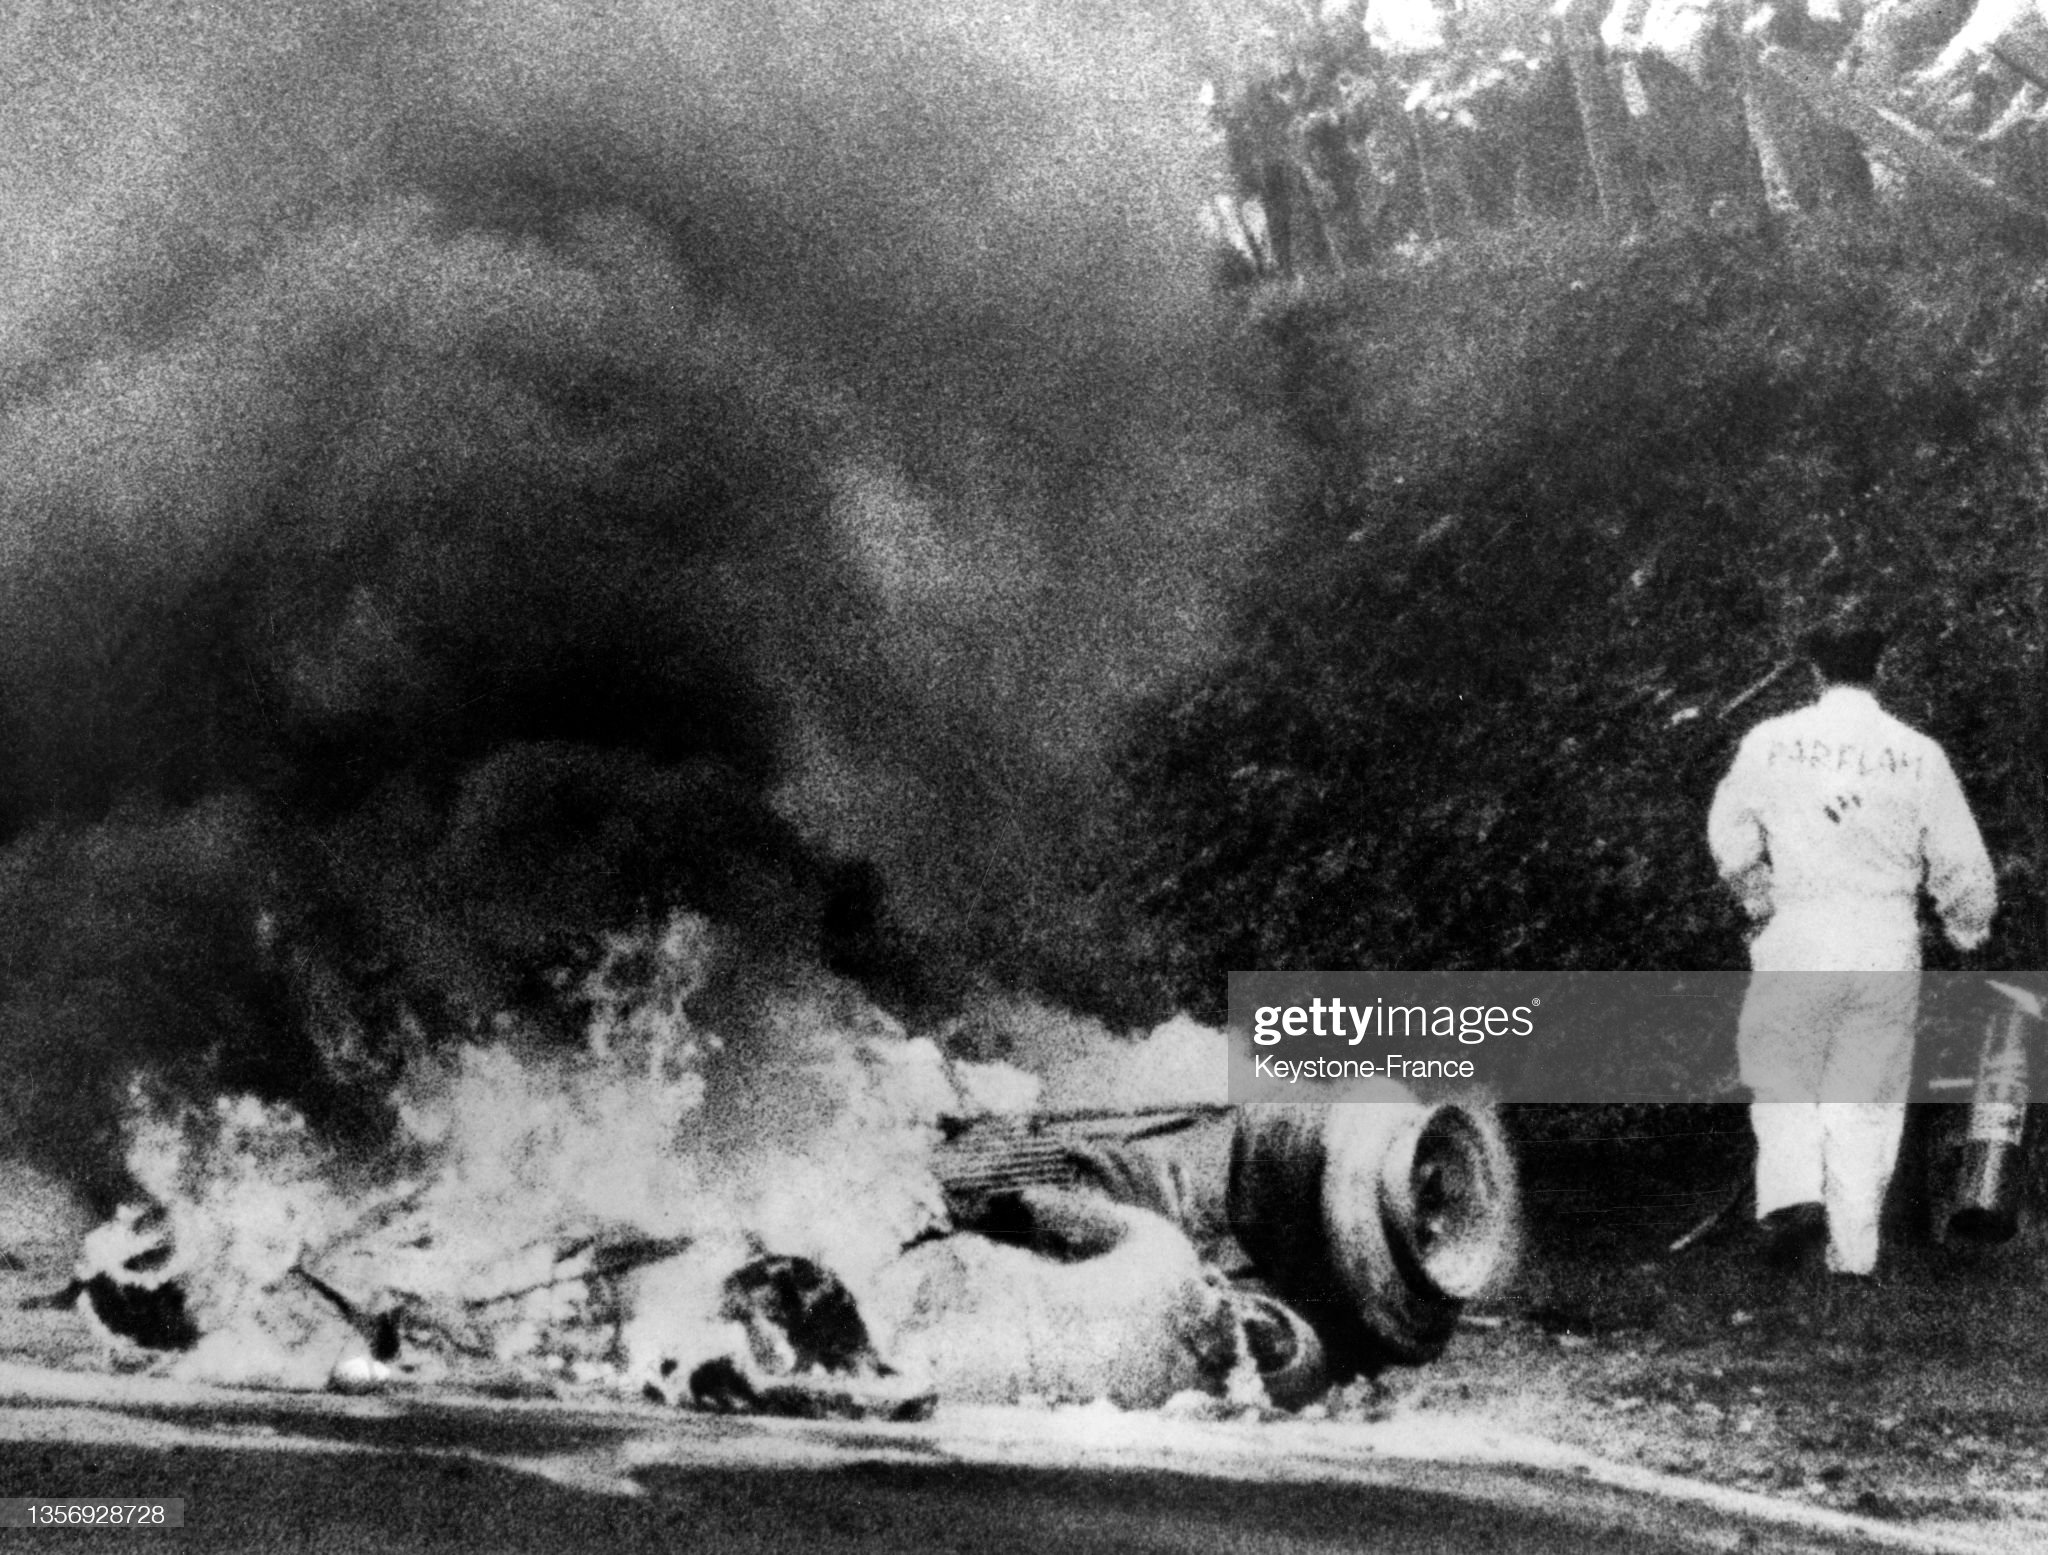 Jo Schlesser's car in flames during his fatal accident.